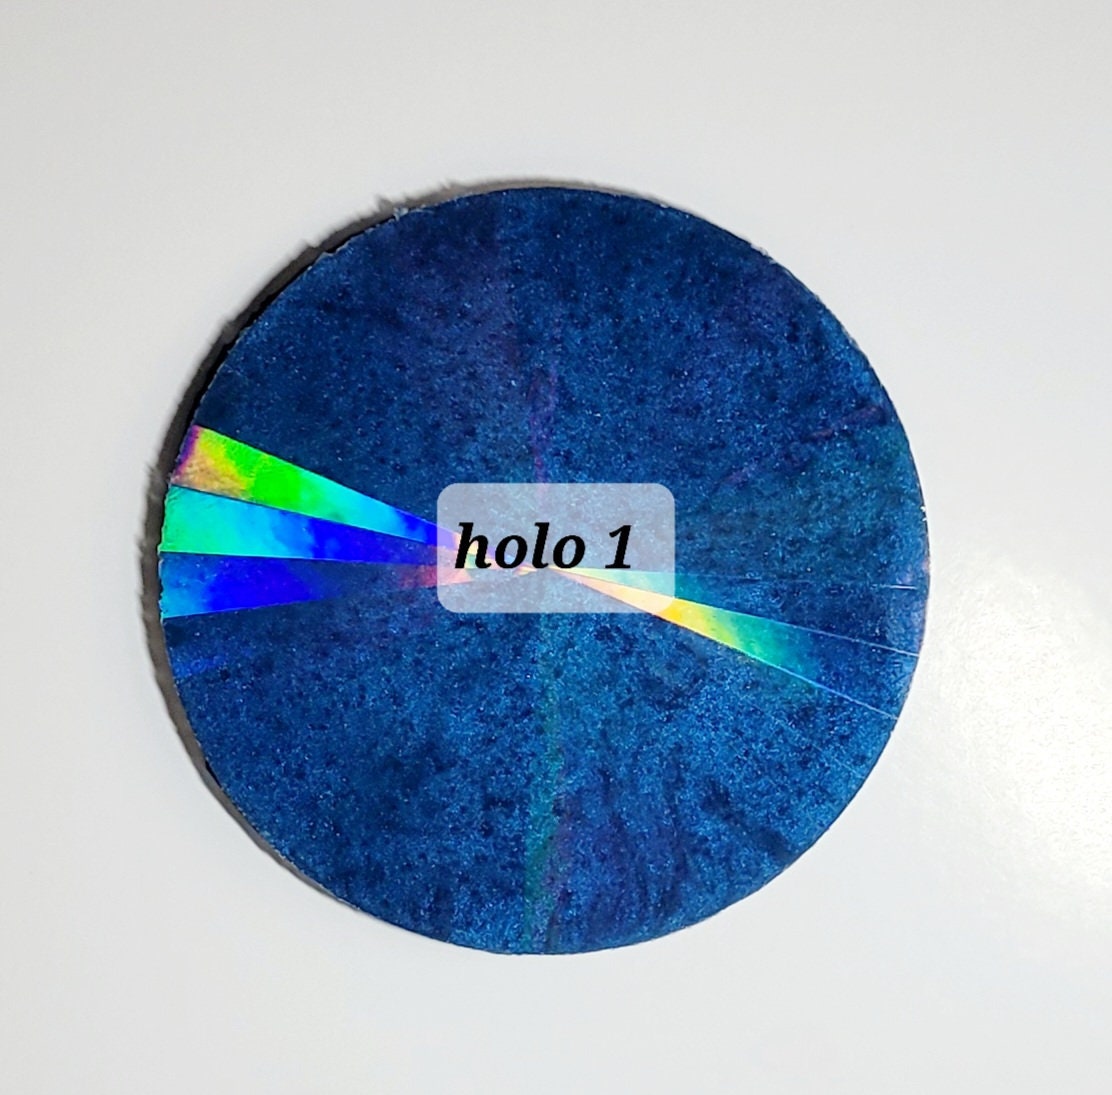 HOLOGRAPHIC Pinwheel Mold Insert for Resin/ Silicone 